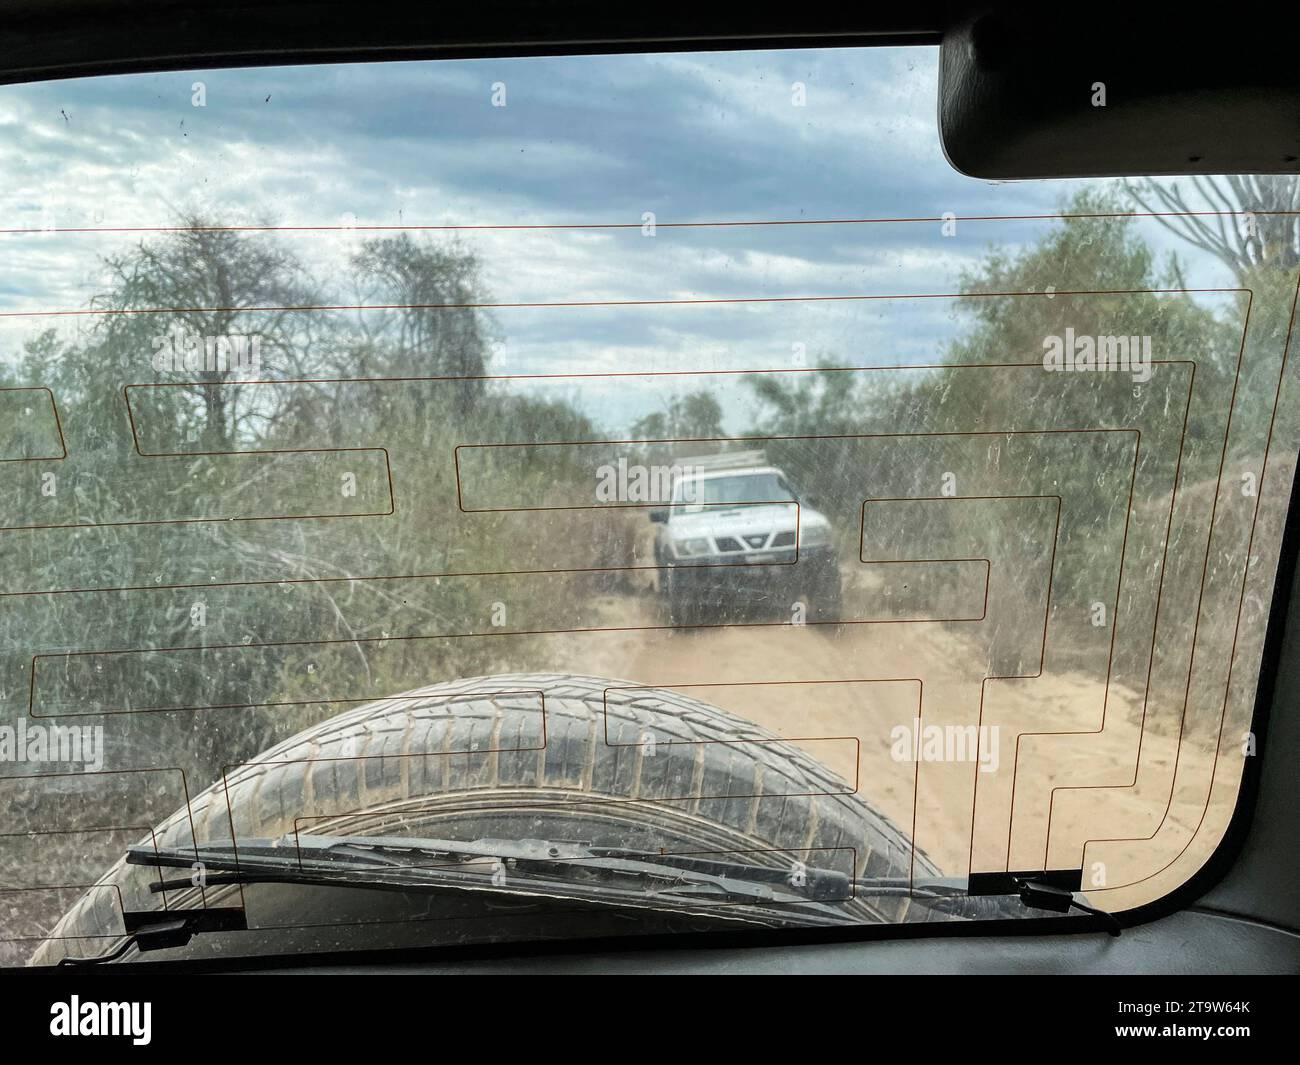 Madagascar, view from the rear window of an off-road vehicle Stock Photo